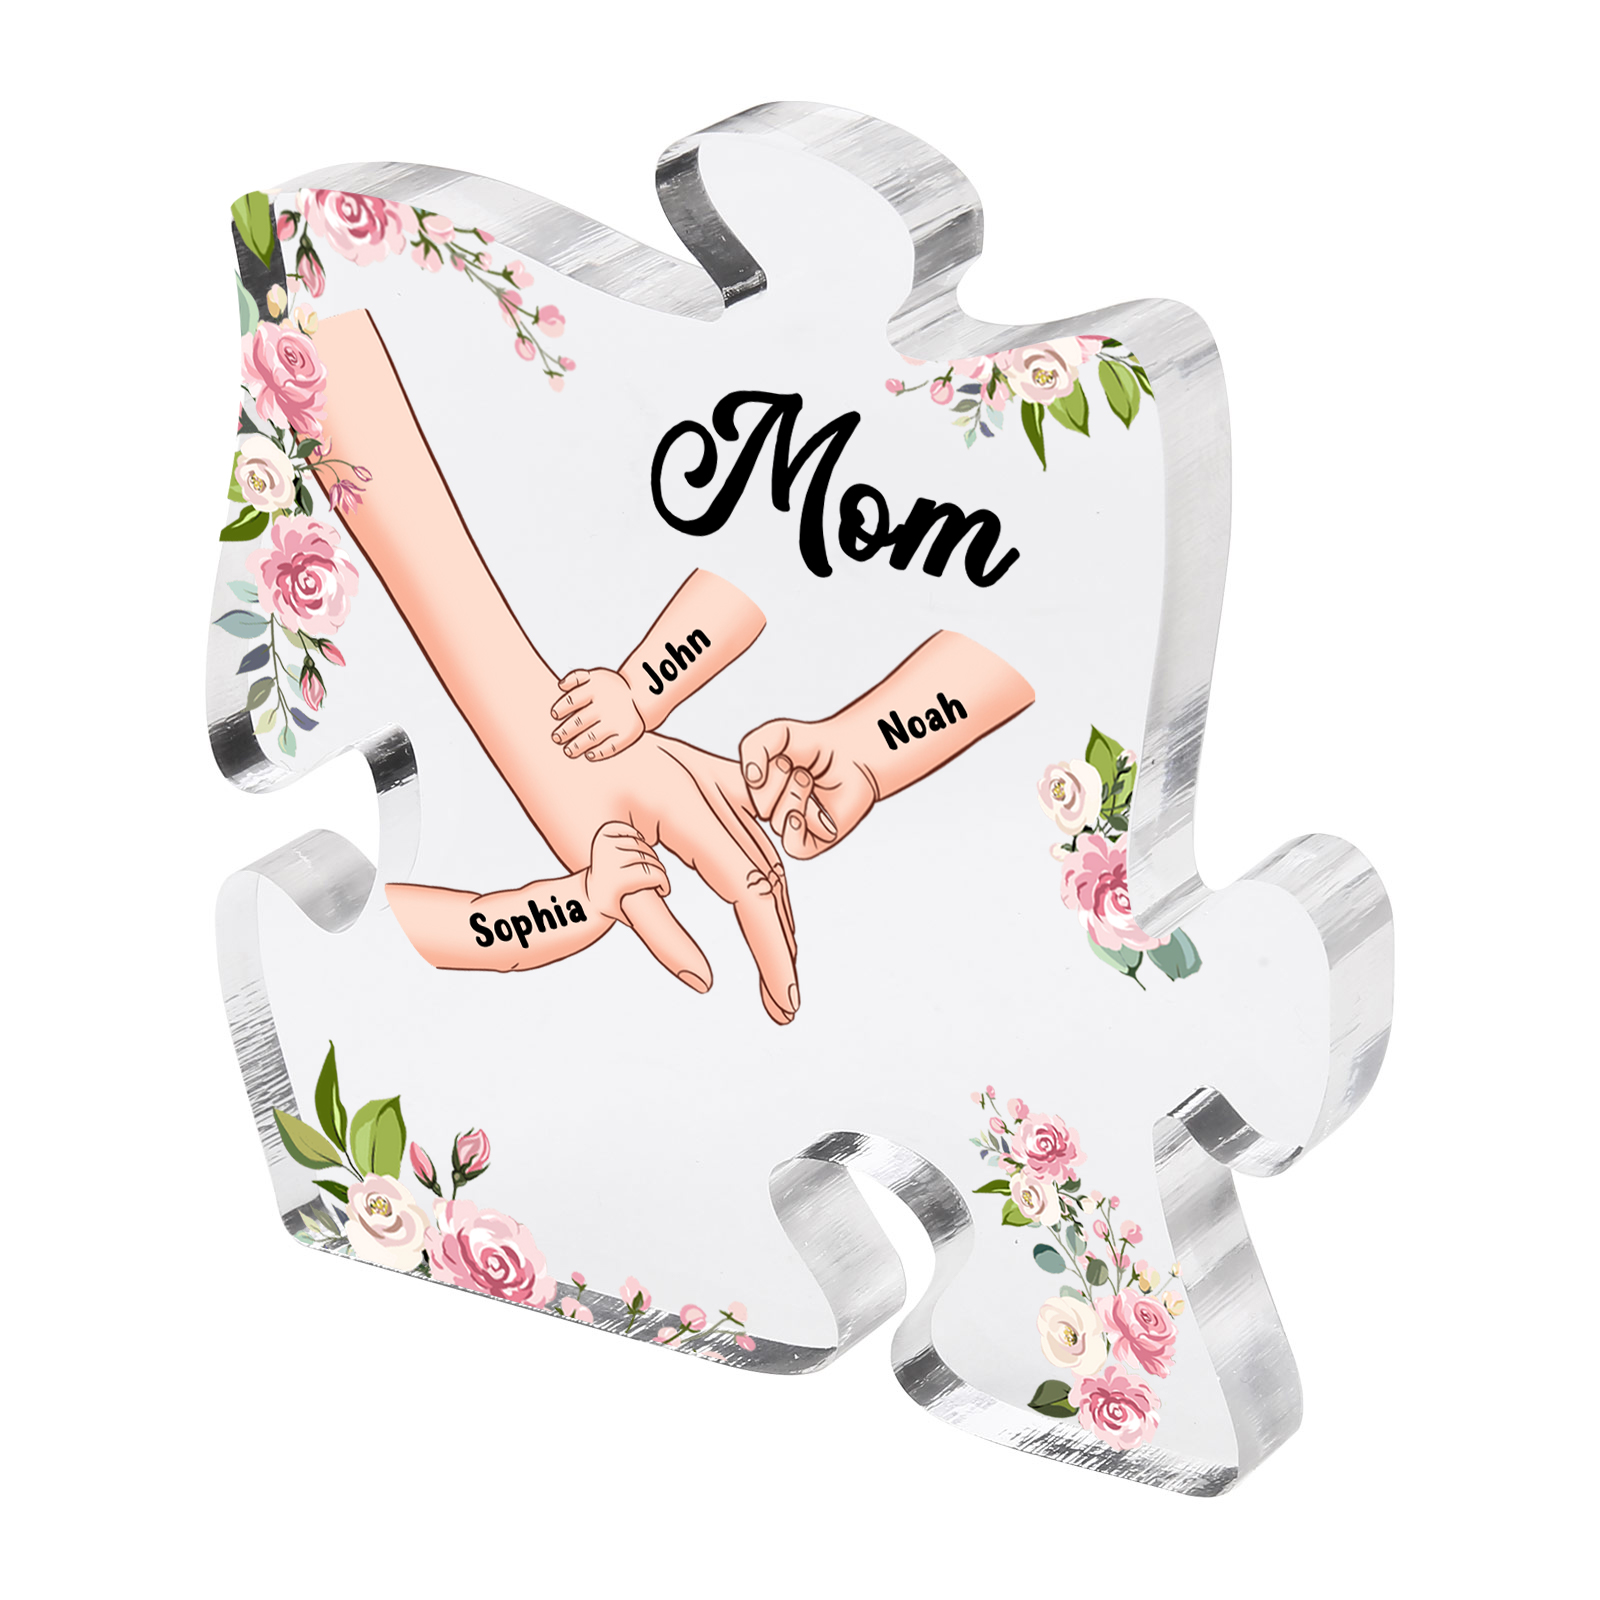 3 Name - Personalized Acrylic Heart Keepsake Customized Name Holding Hands Acrylic Plaque Ornament Mother's Day Gift for Mom